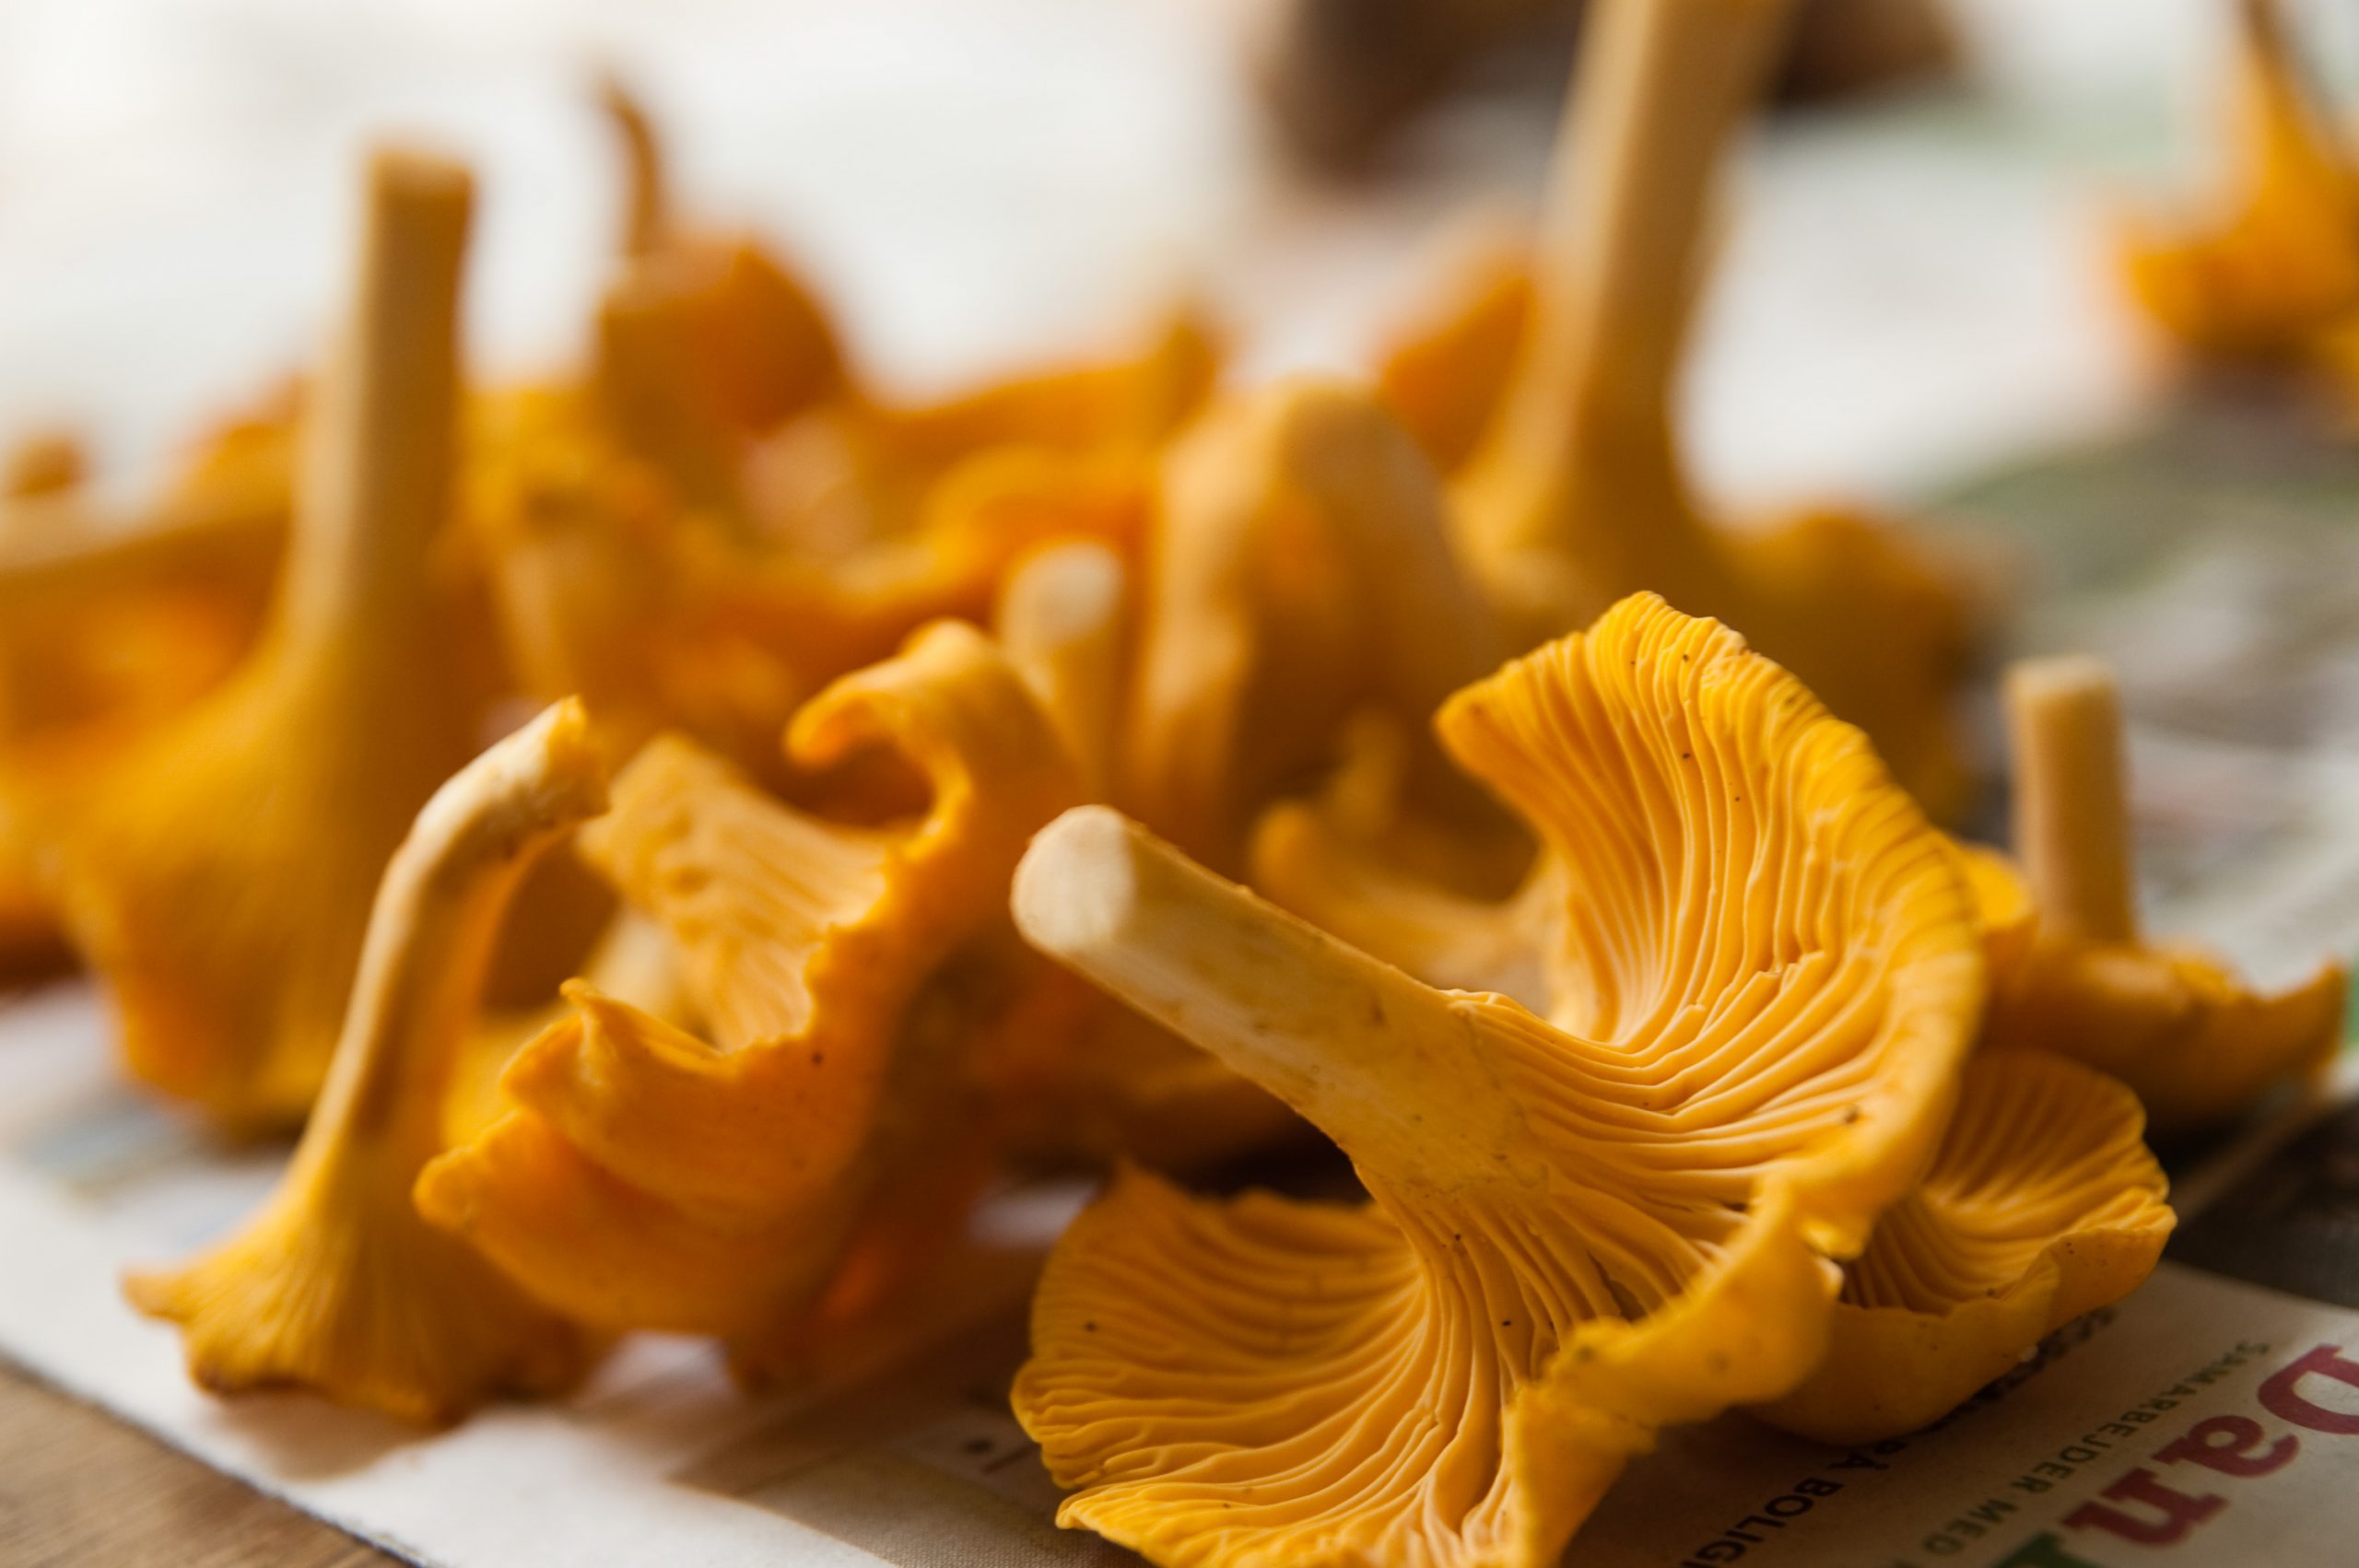 Beautiful and flavorful, Chanterelles can be found in most forests around the world.